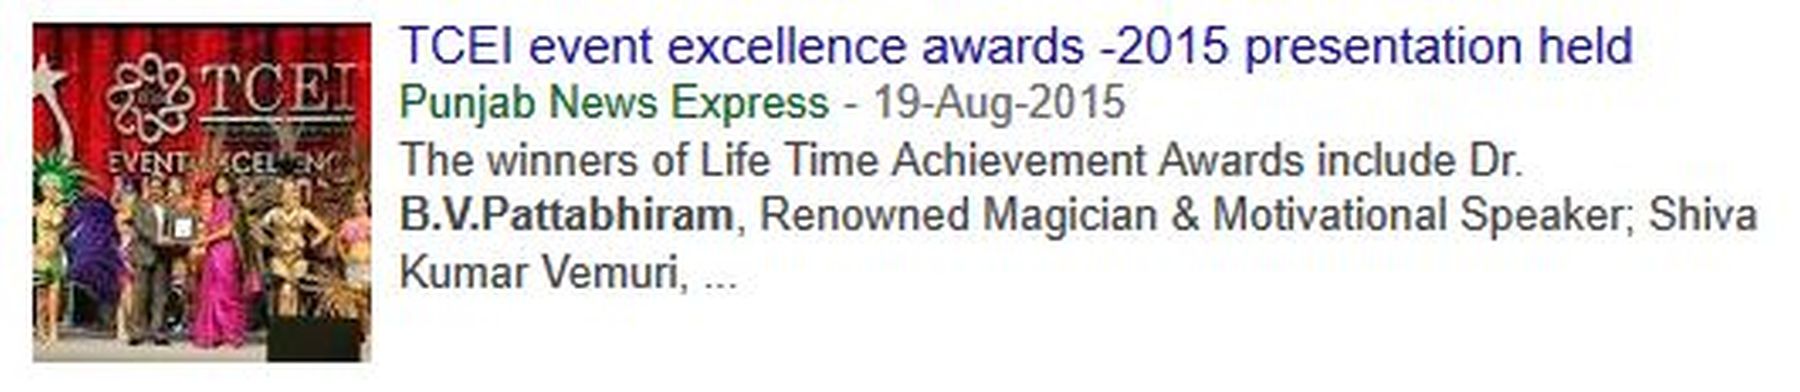 2015-08-19 - TCEI event excellence awards -2015 presentation held - Punjab News Express